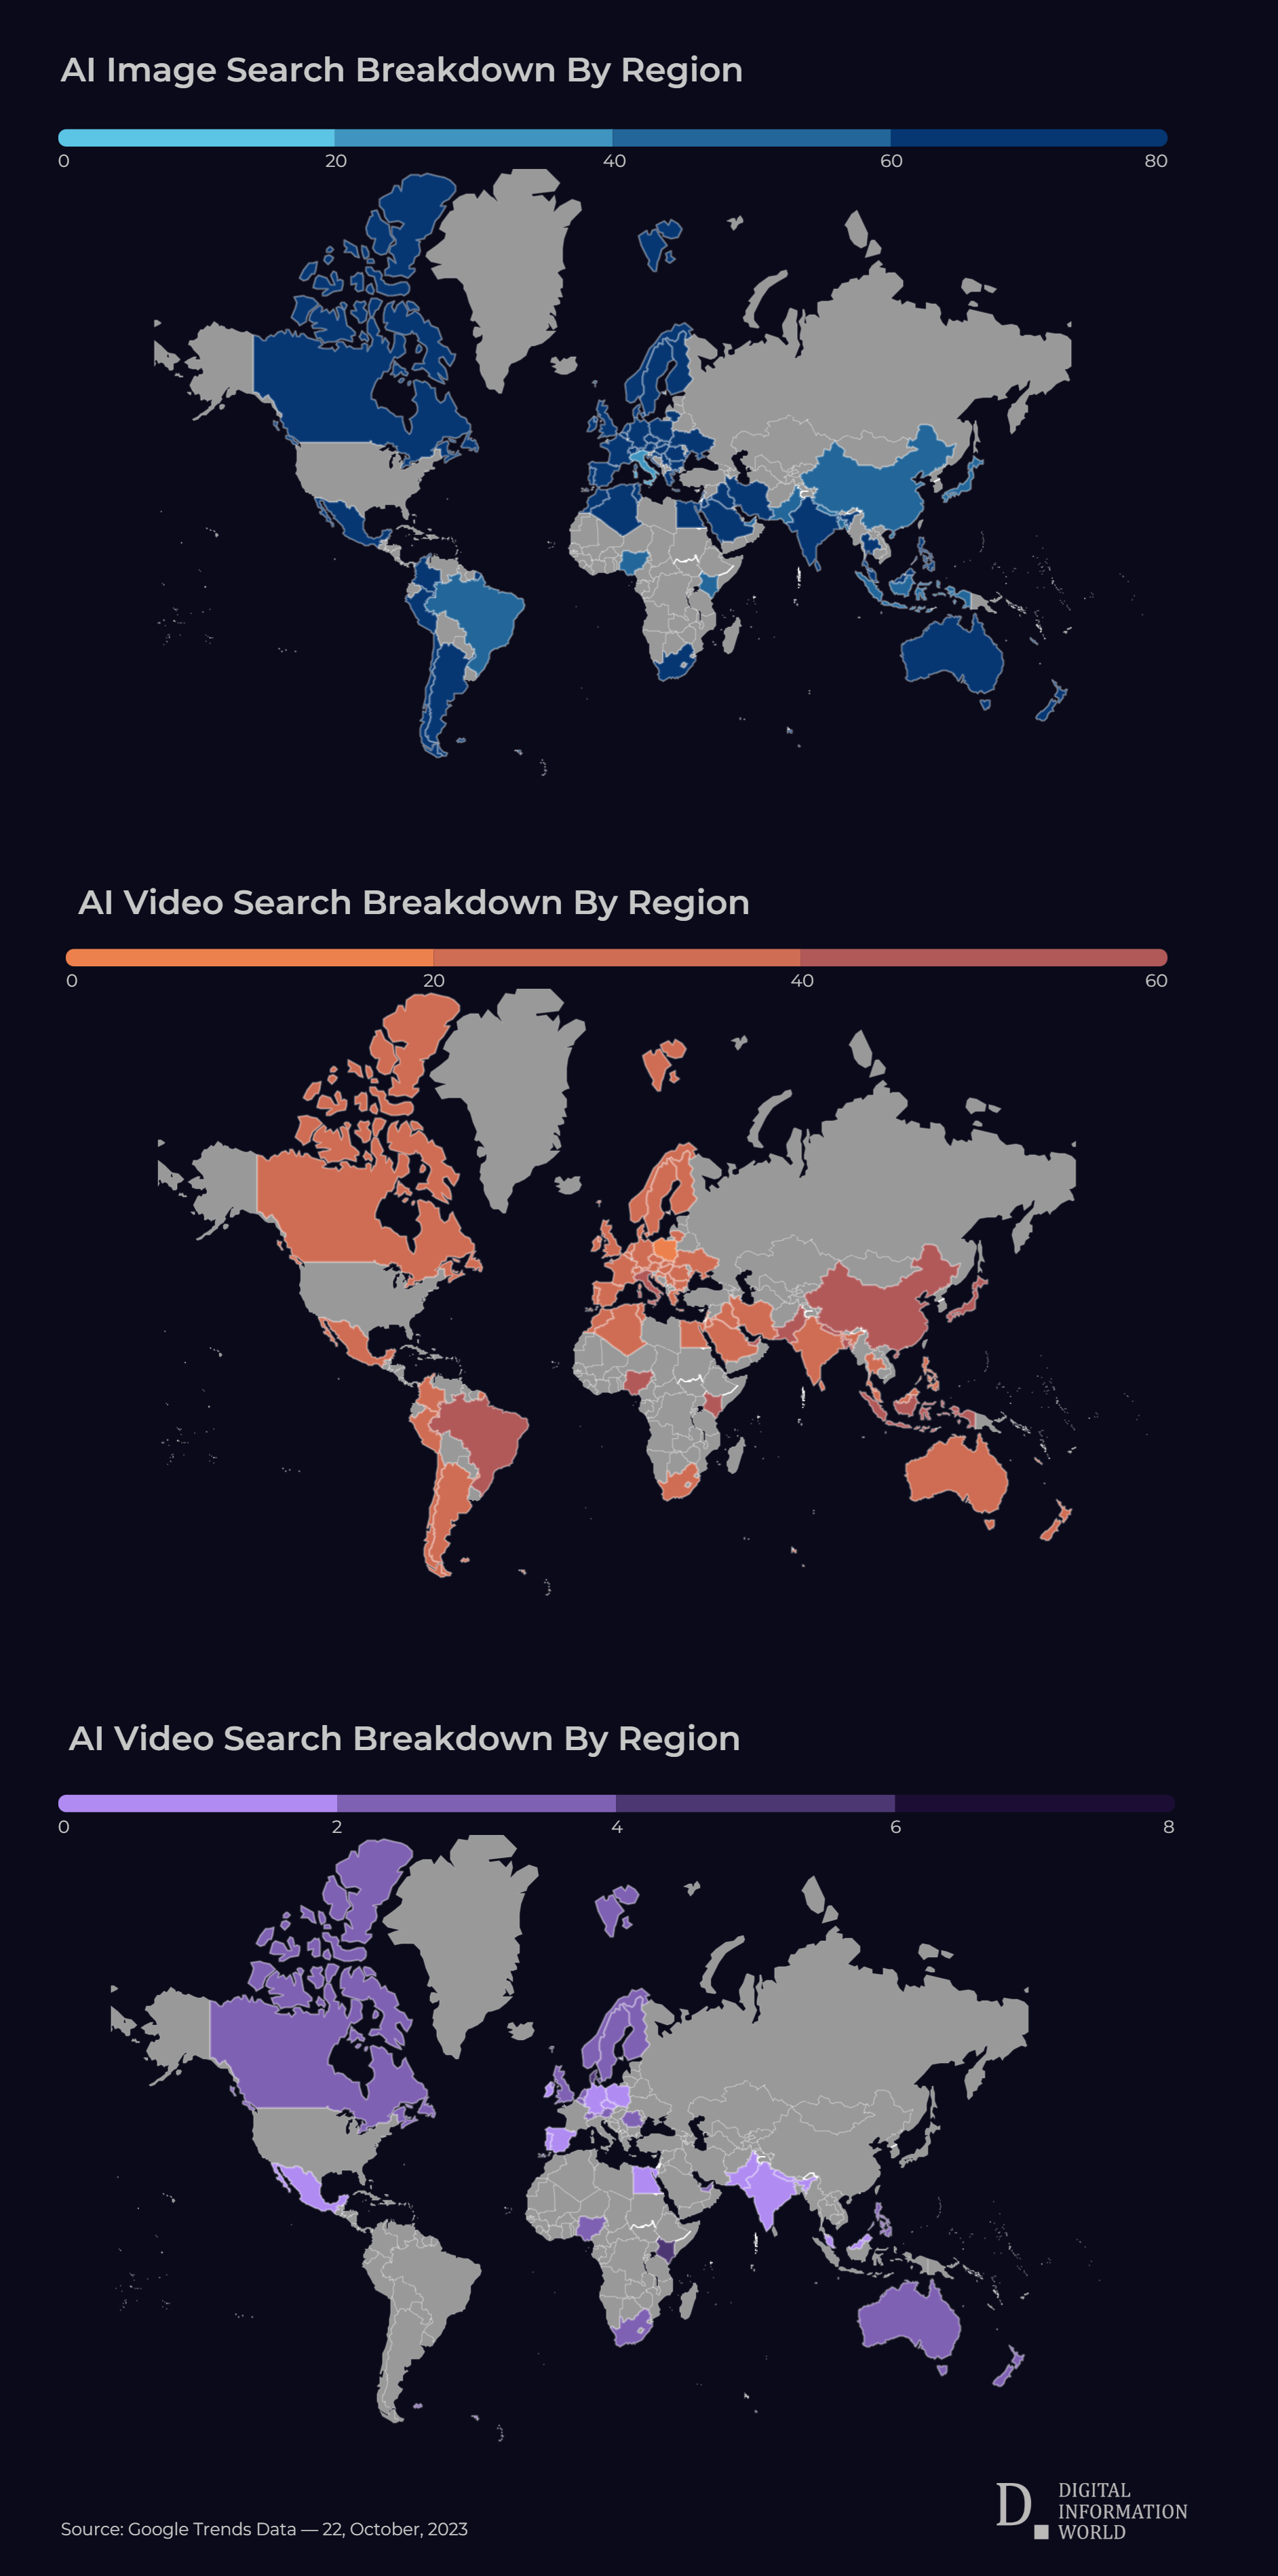 Global Insights: How Countries Embrace AI - Poland's Love for AI Images, Vietnam's Video Craze, and Kenya's Written Content Focus